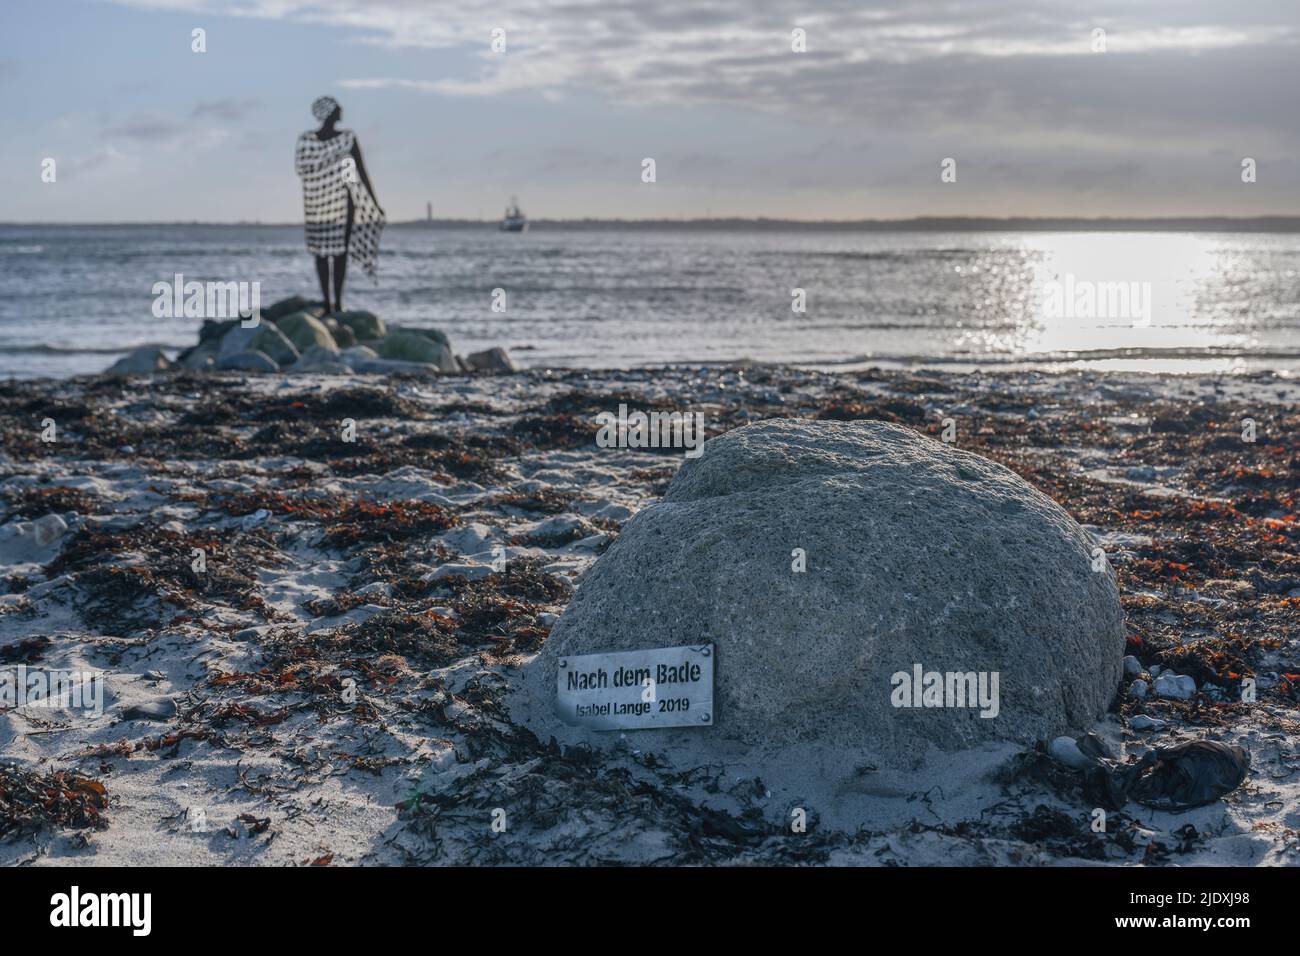 Germany, Schleswig-Holstein, Strande, Information sign in front of After Bath statue by Isabel Lange Stock Photo